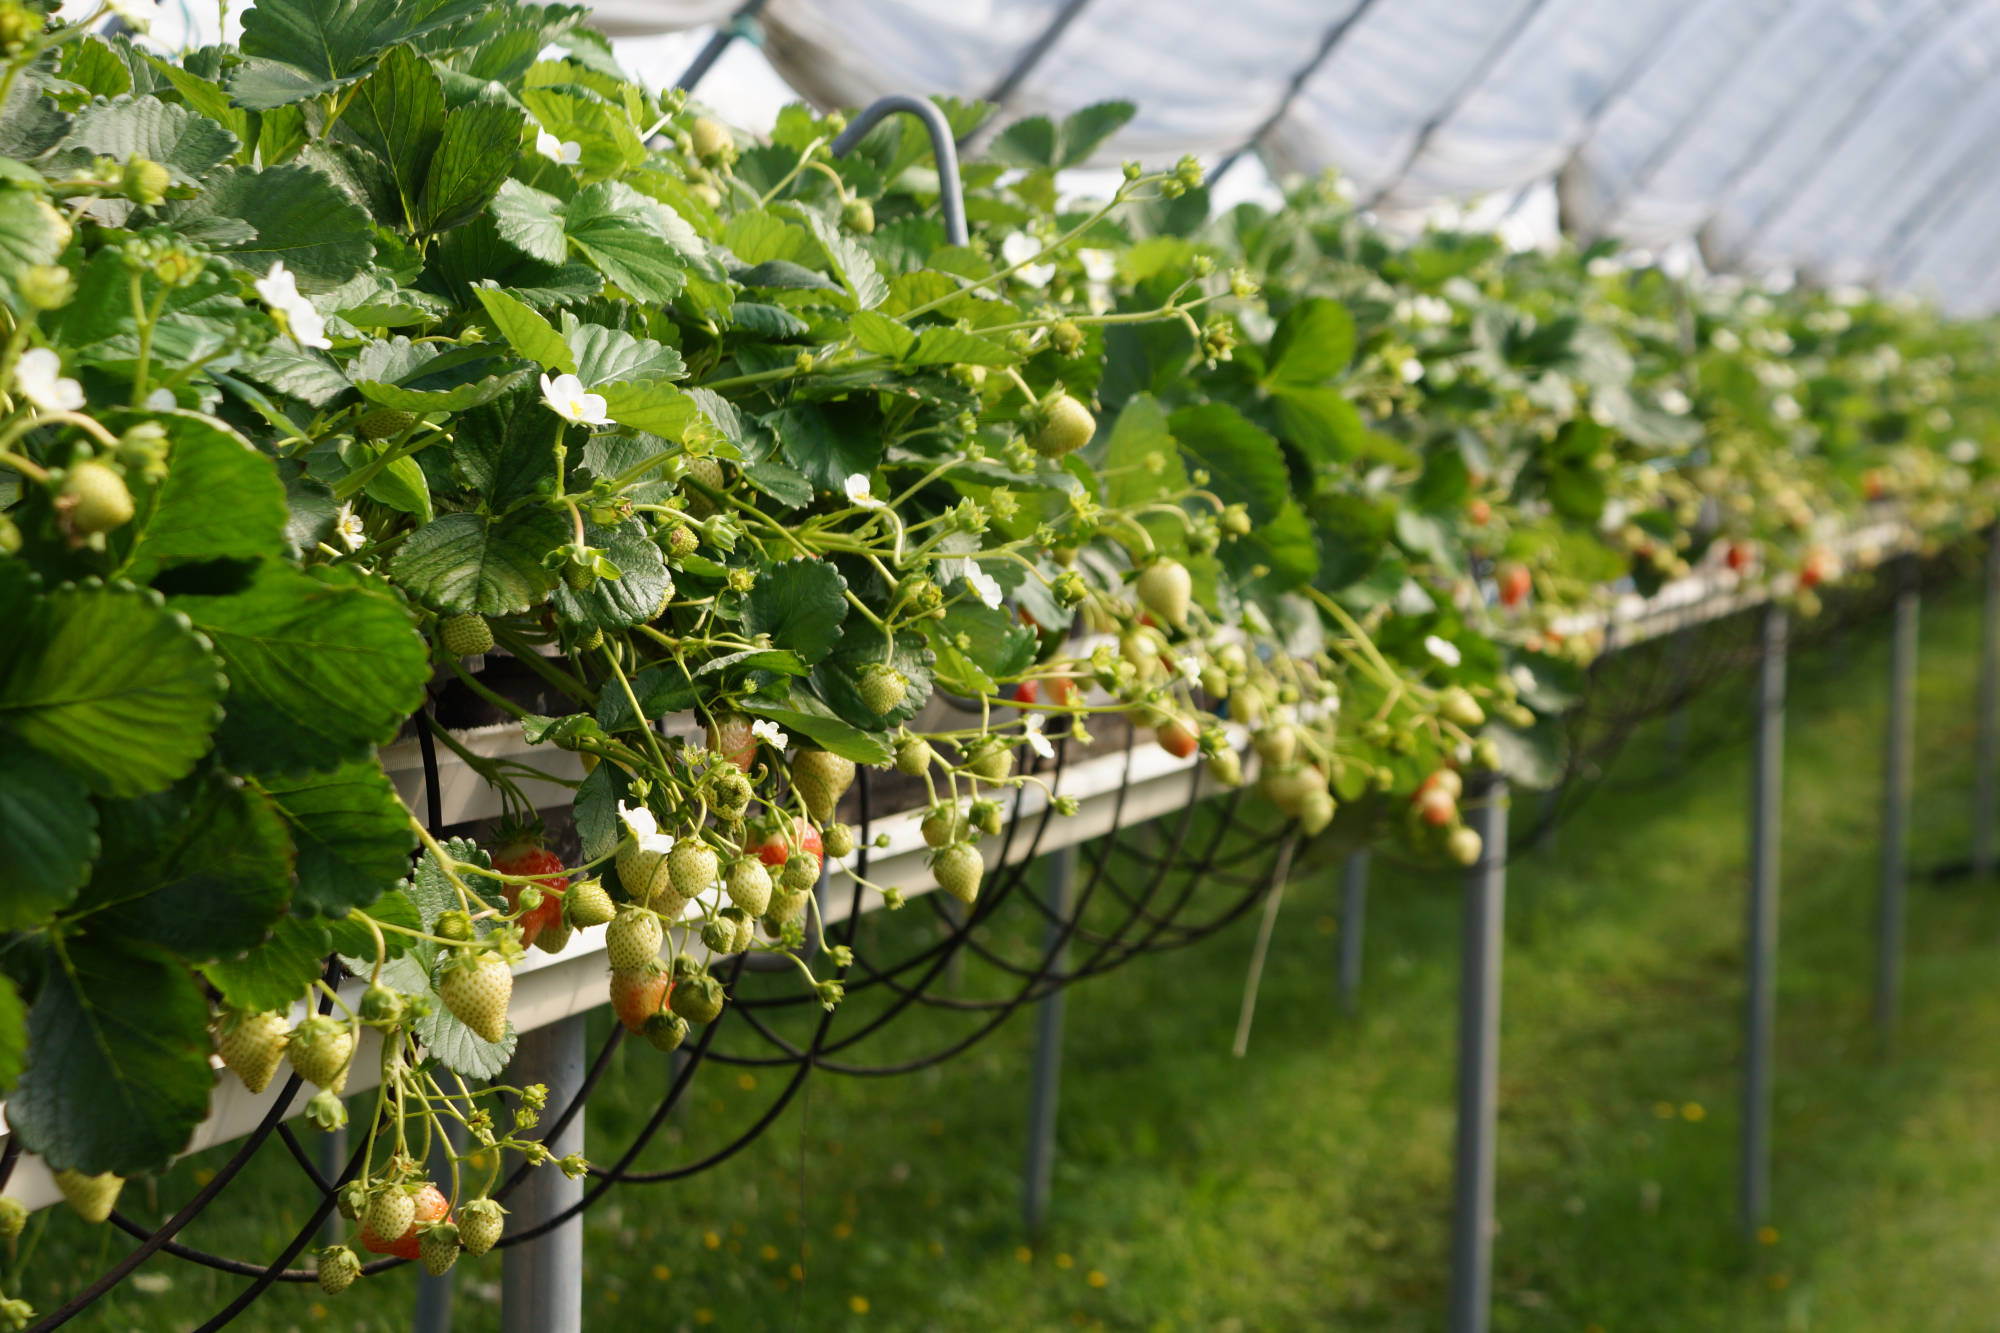 Modern Berry Farming, Audit and Business Improving